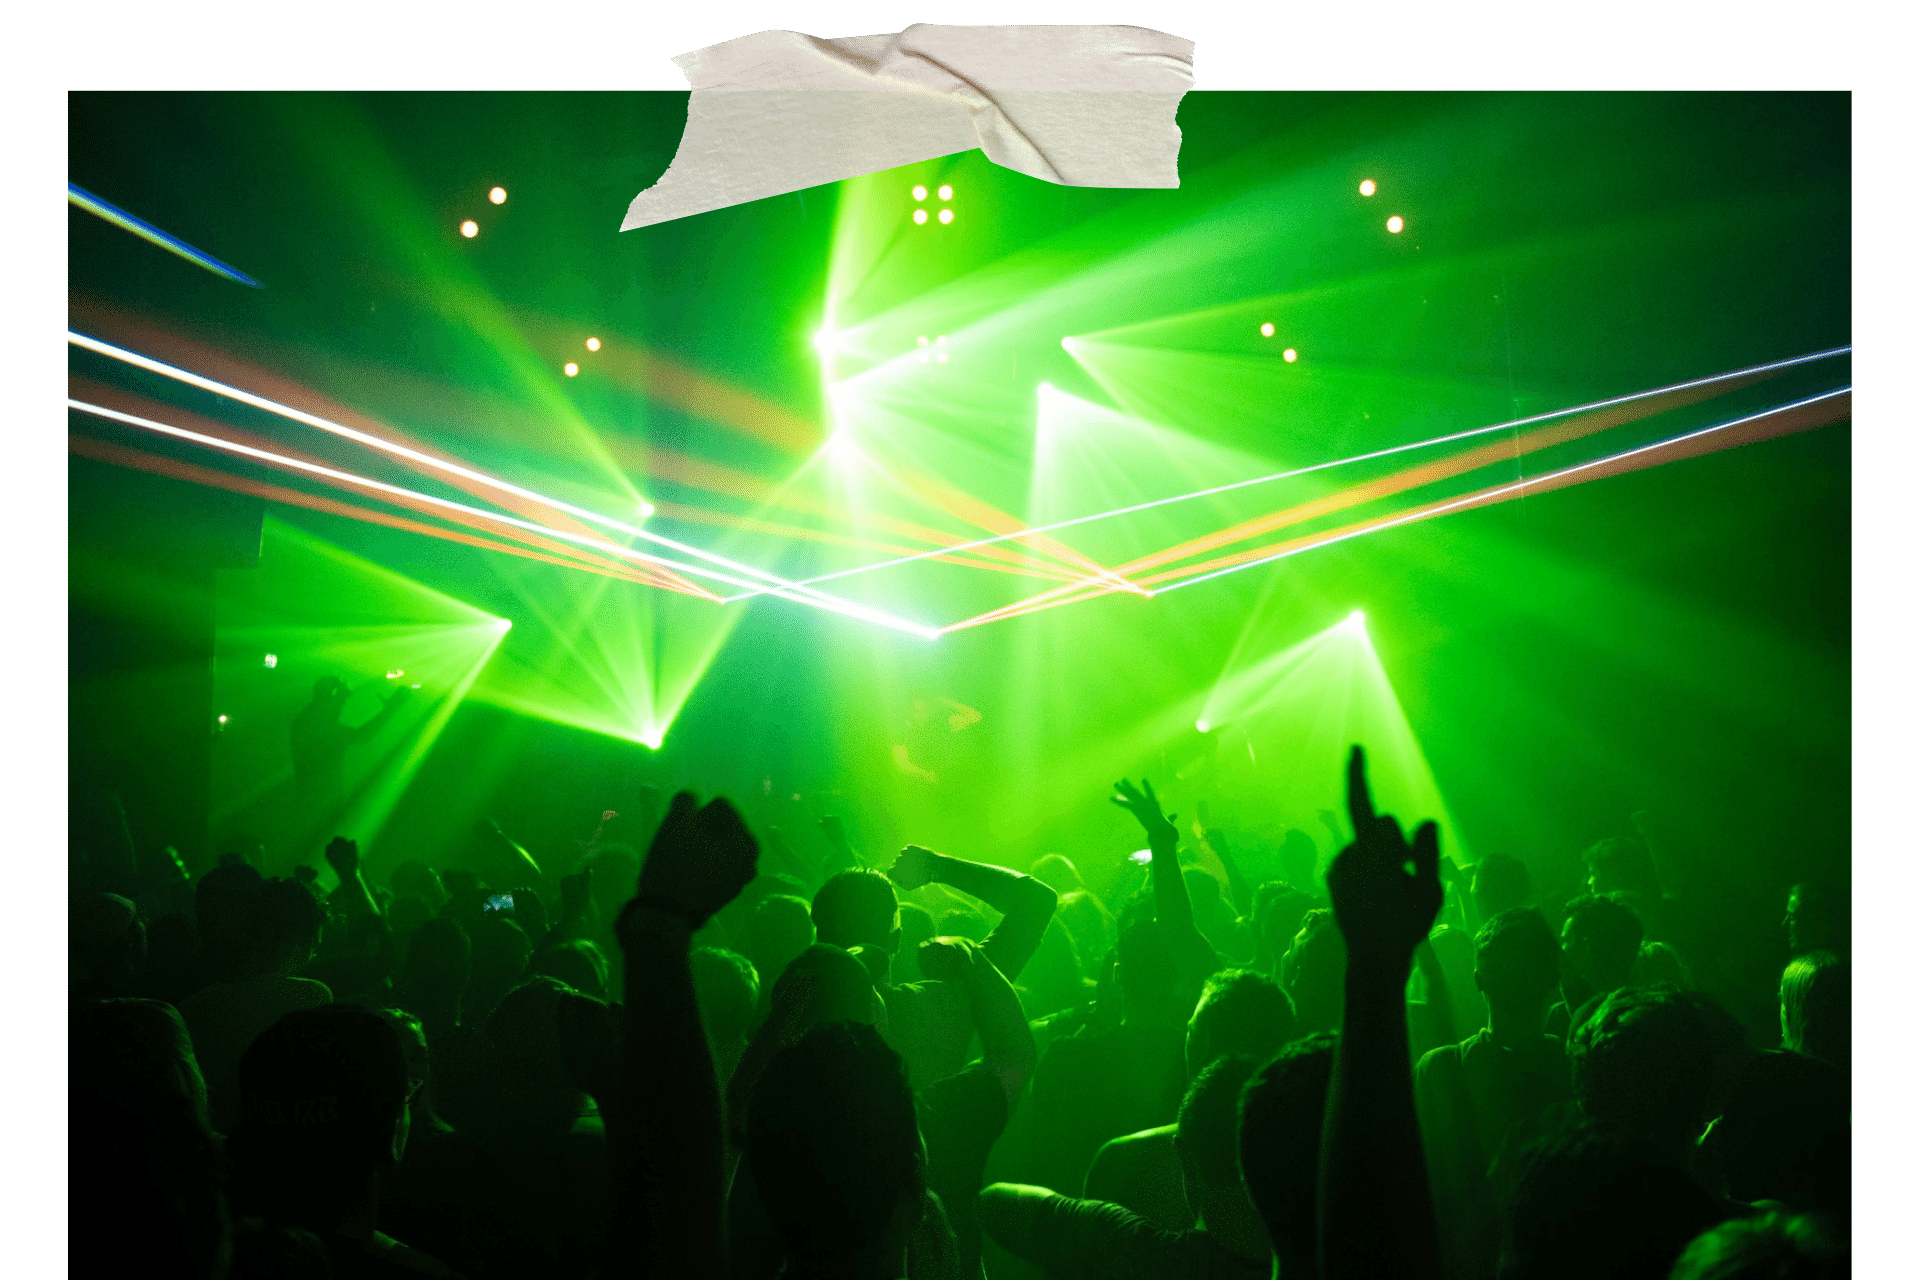 Image shows the interior of a night club, lit up by strobe lights and with hands in the air.